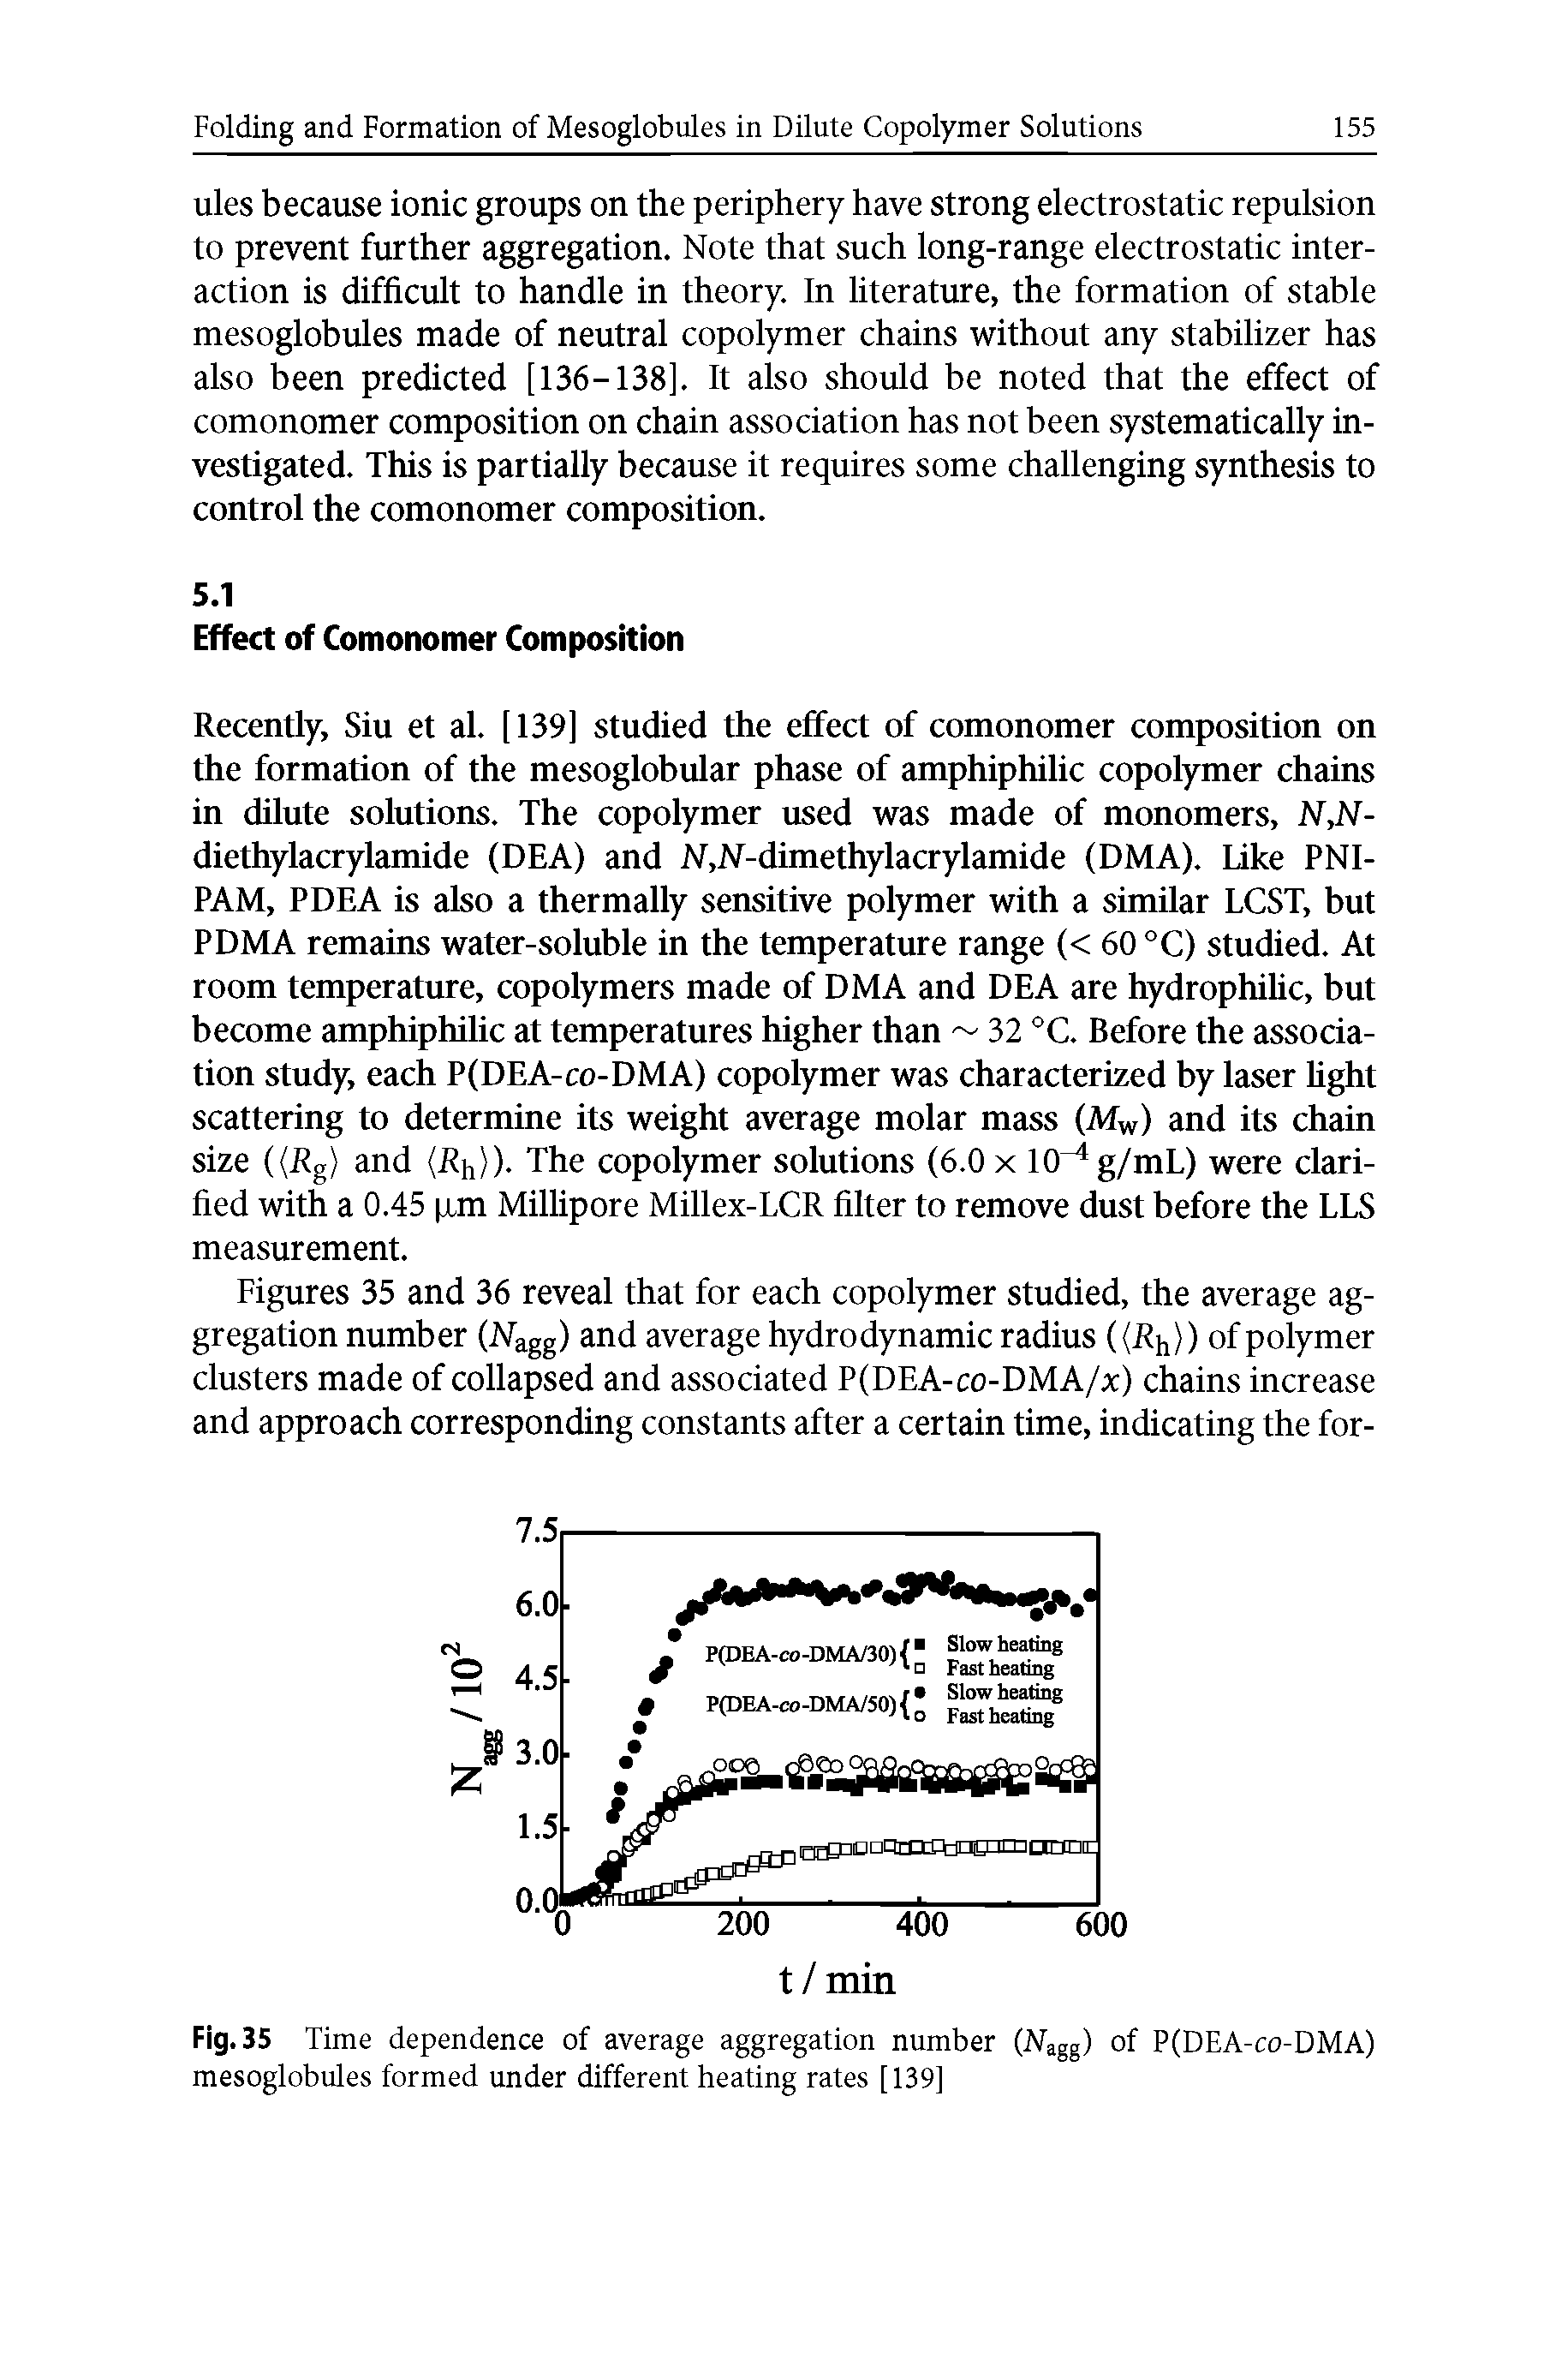 Figures 35 and 36 reveal that for each copolymer studied, the average aggregation number (ATagg) and average hydrodynamic radius ((%)) of polymer clusters made of collapsed and associated P(DEA-co-DMA/x) chains increase and approach corresponding constants after a certain time, indicating the for-...